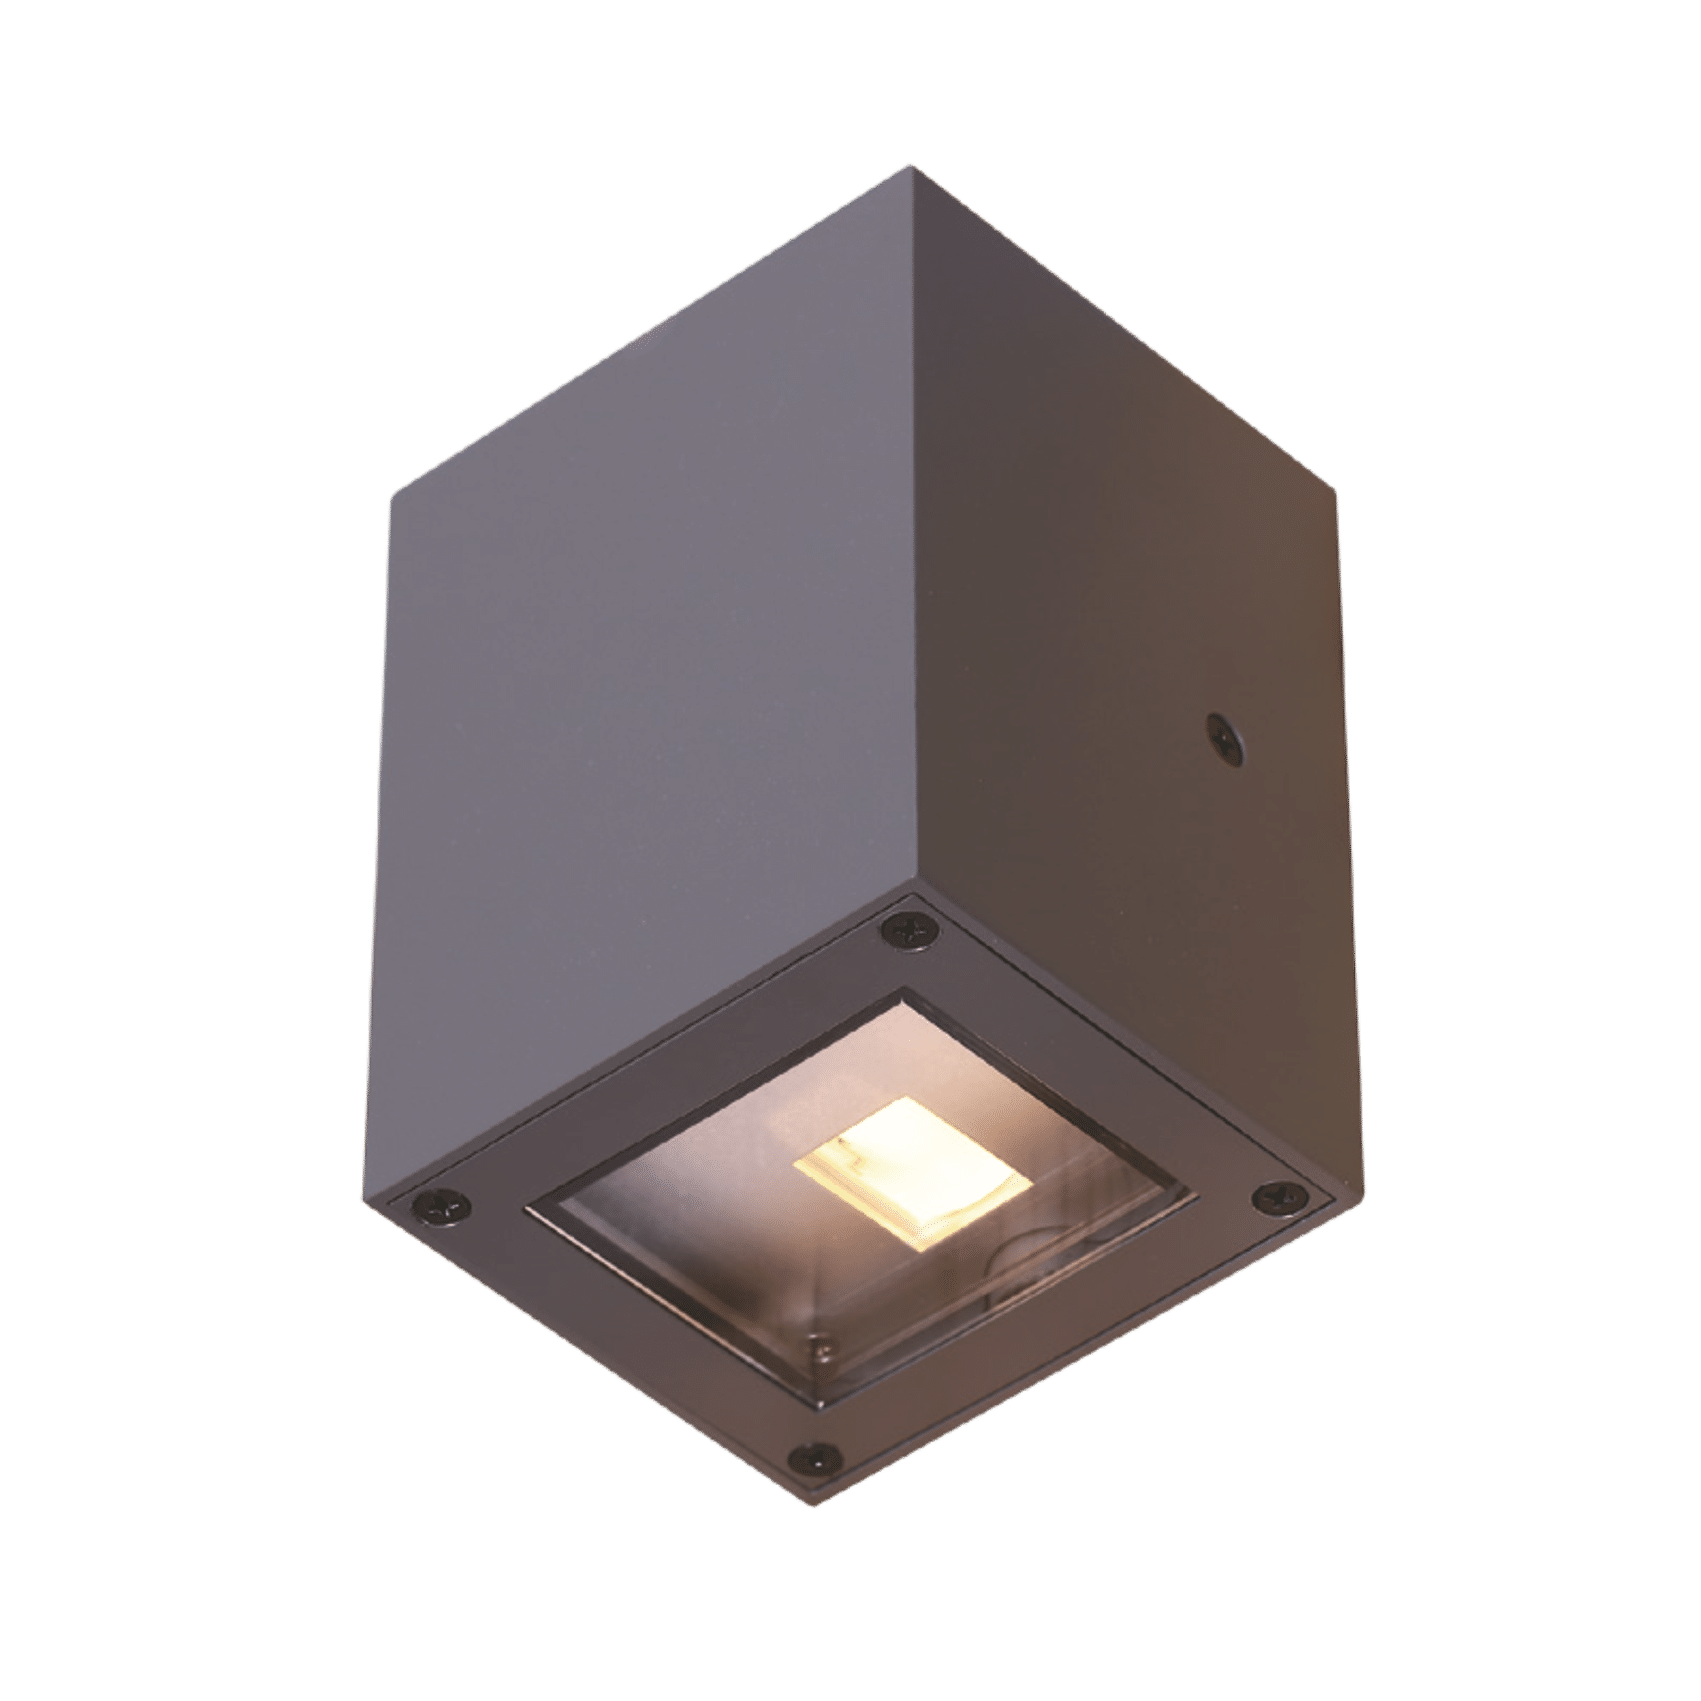 LED Wall Mounted Light - EST-D7AD0237